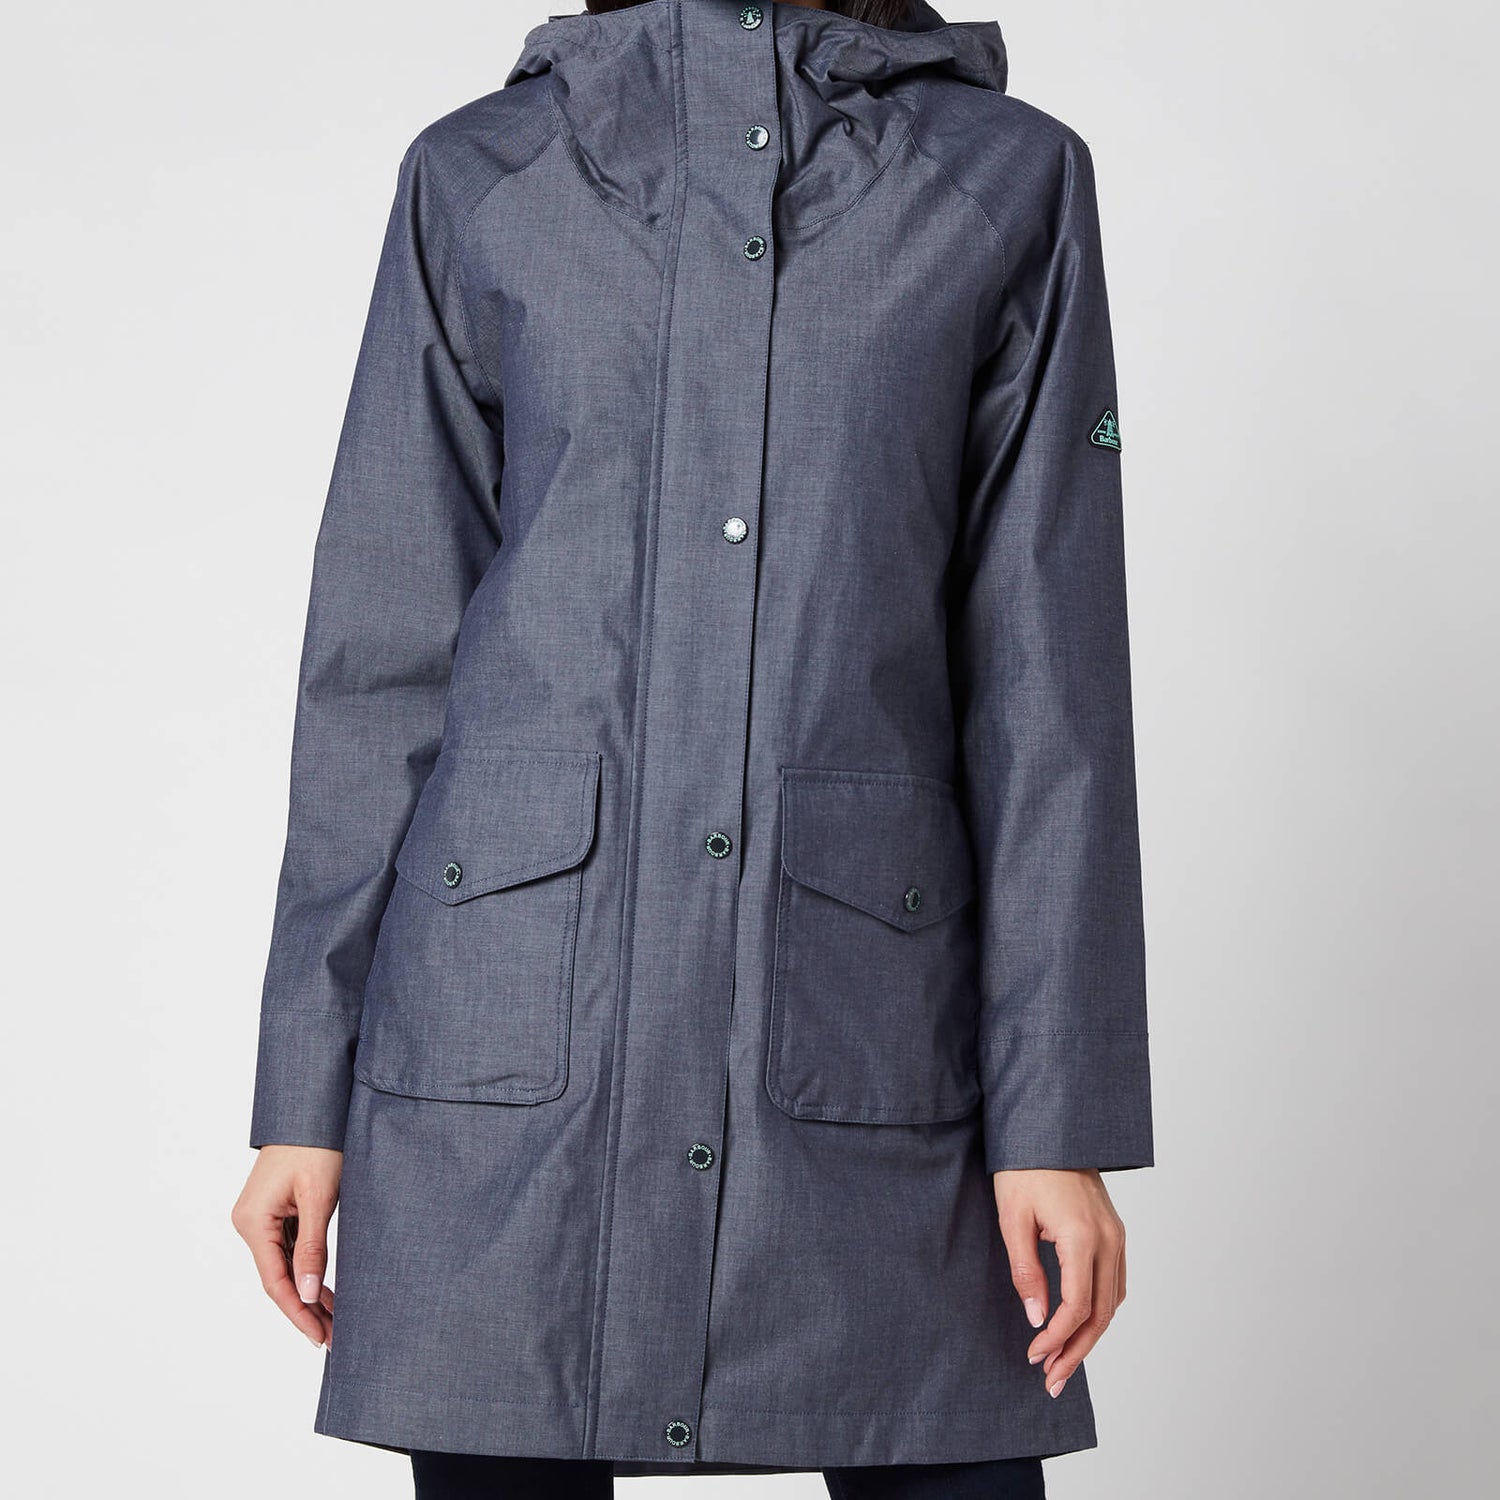 Barbour Women's Padstow Jacket - Chambray Marl/Navy